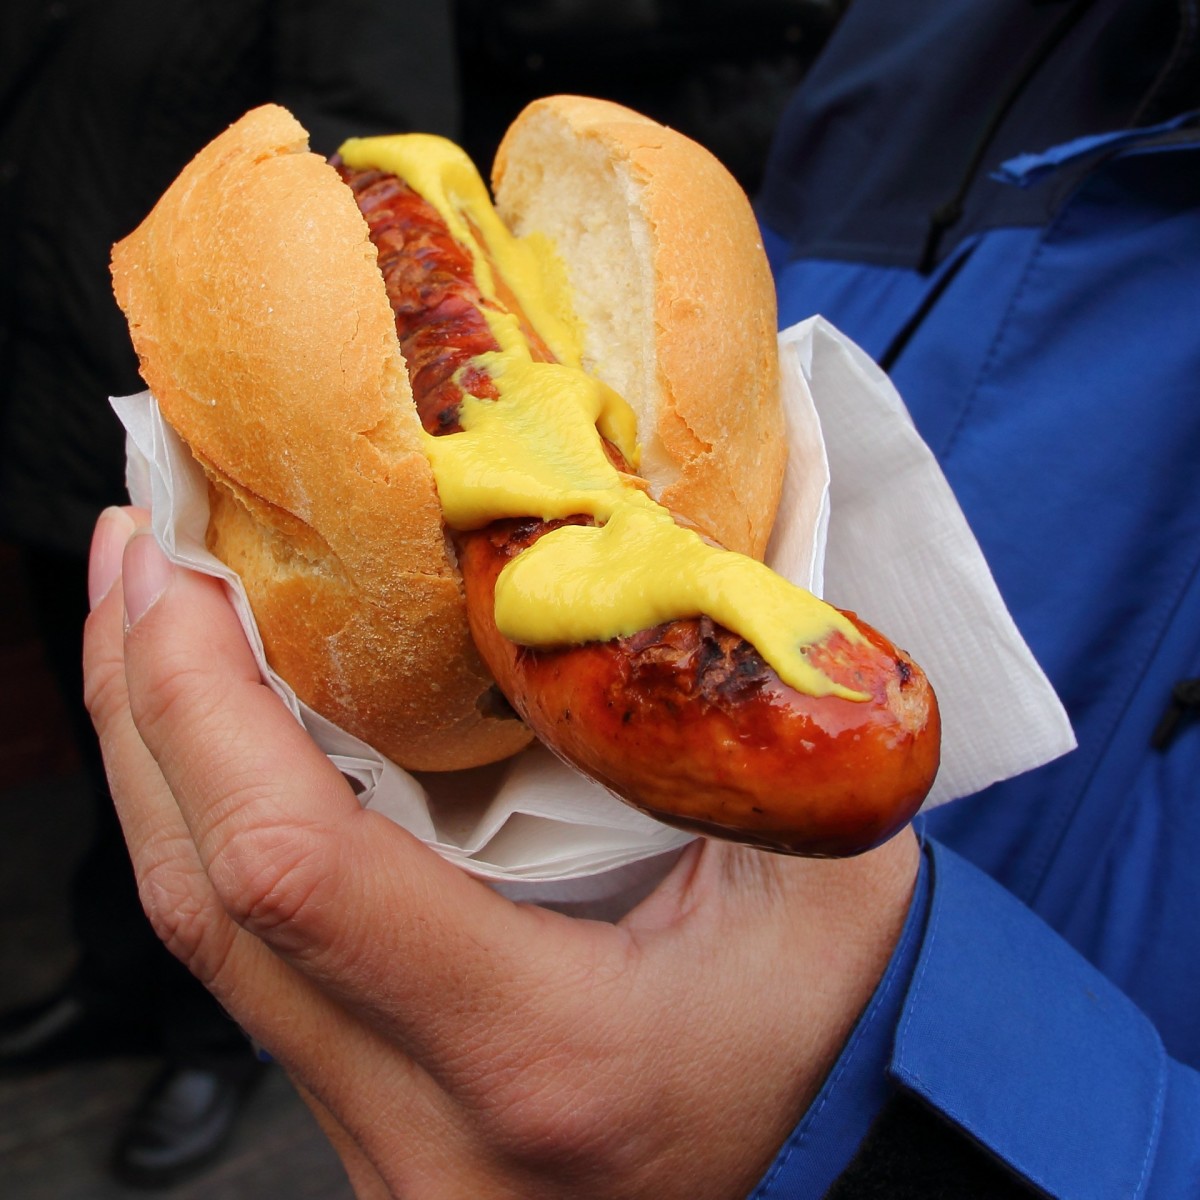 Is the mustard safe to slather on a bratwurst?